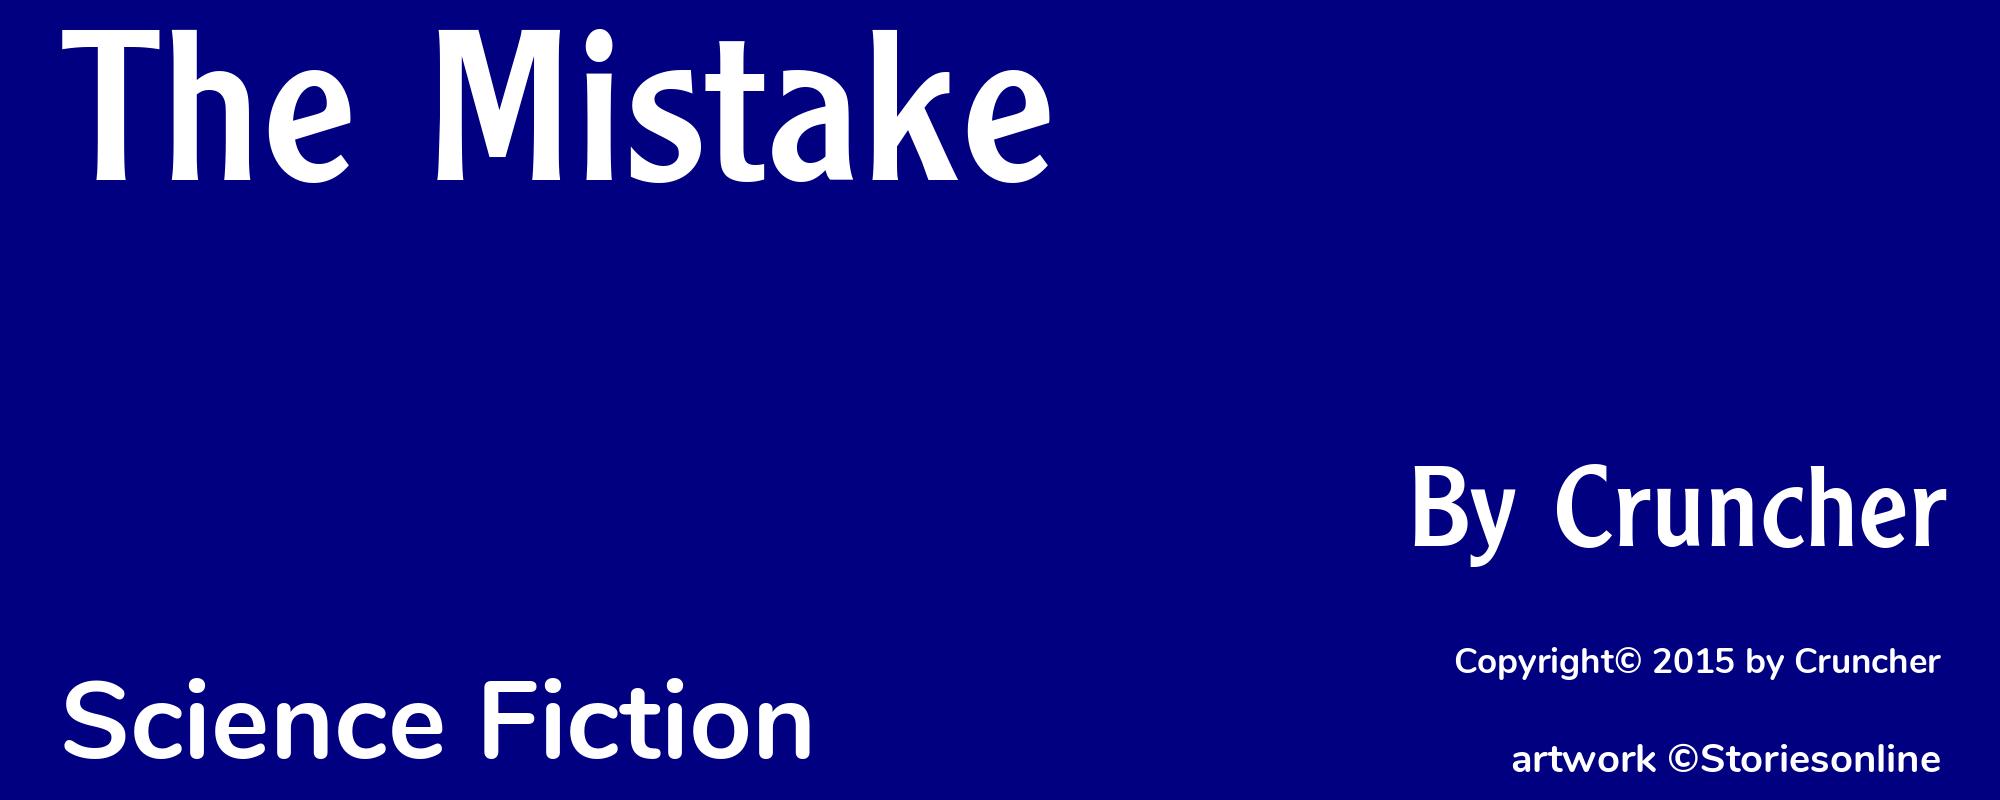 The Mistake - Cover